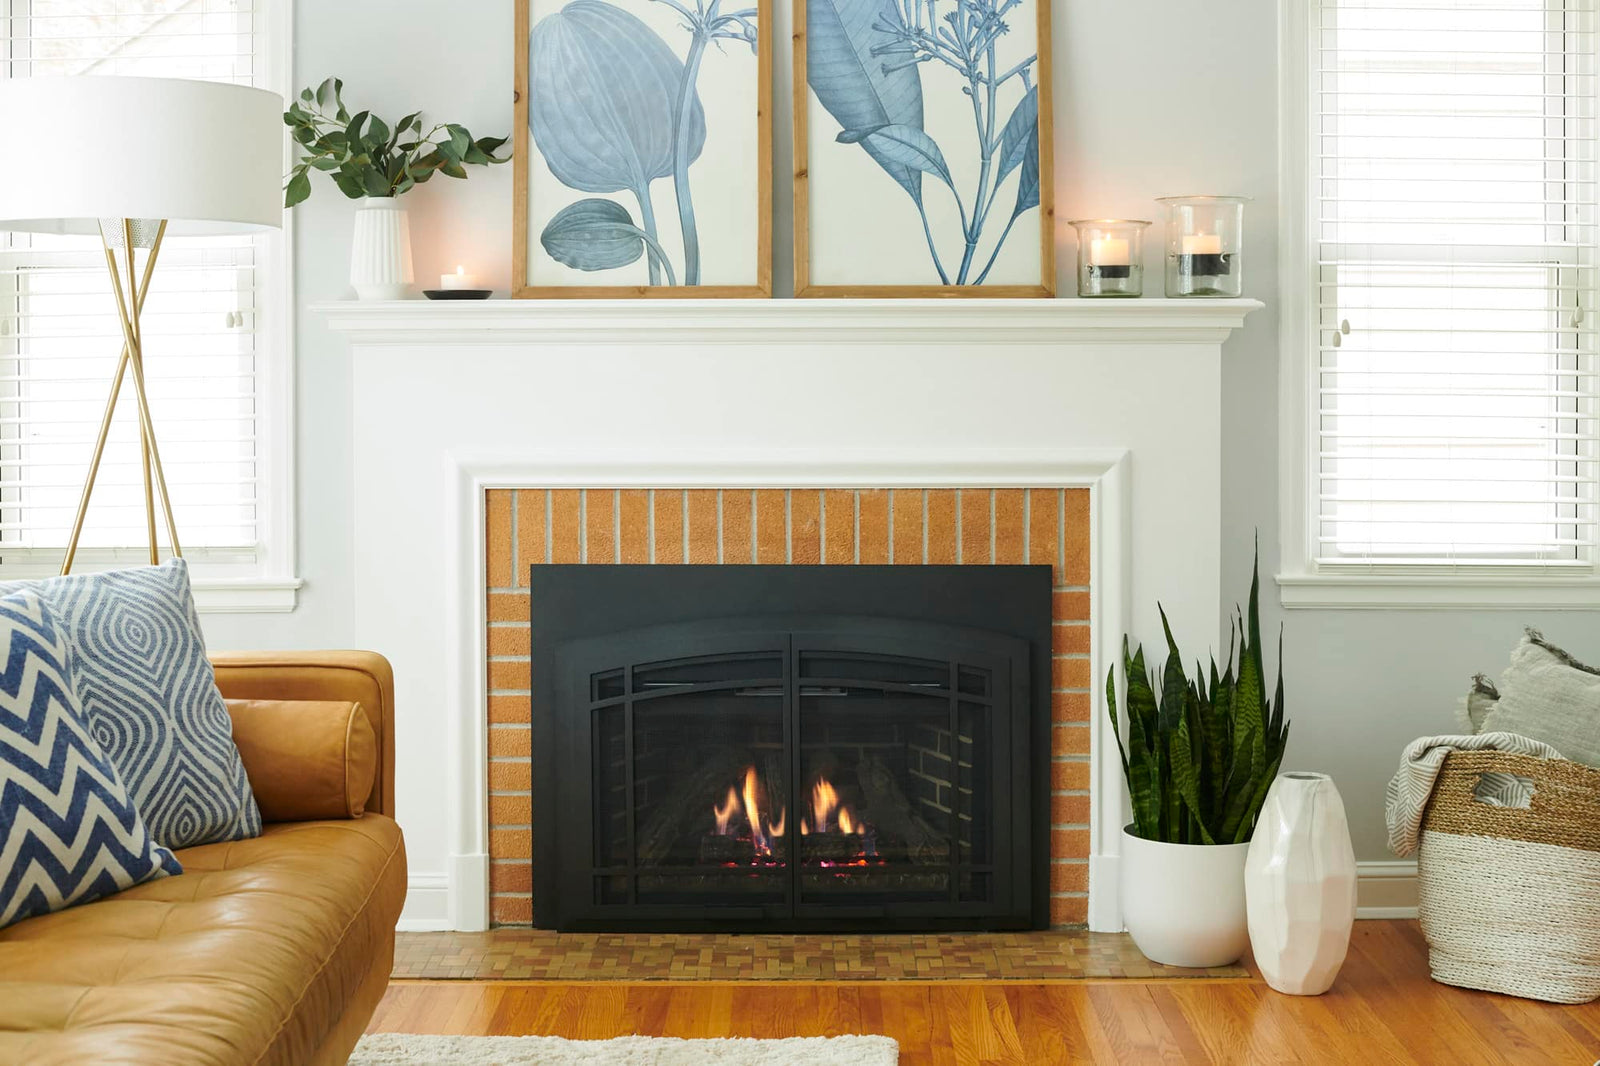 Indoor Fireplaces: Is a Gas Fireplace Insert Right for Me?